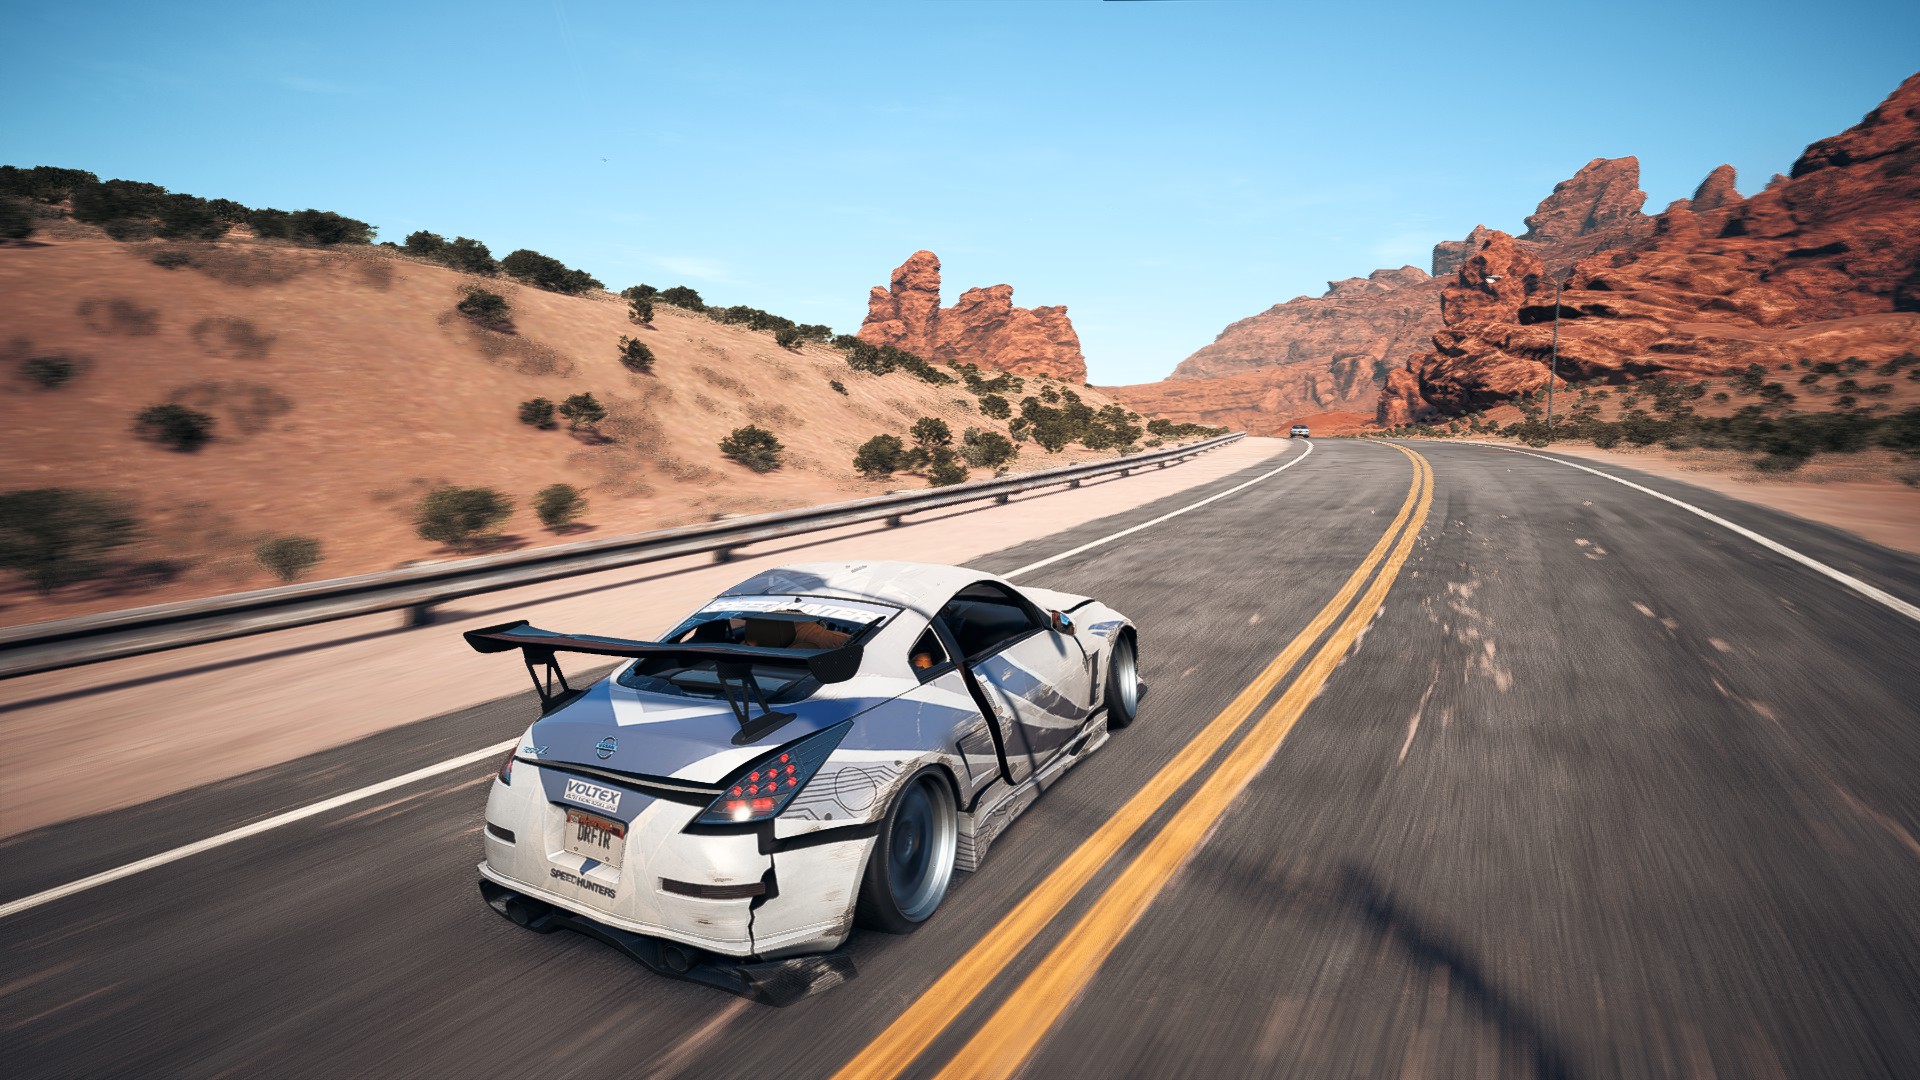 pixel 3 need for speed payback images